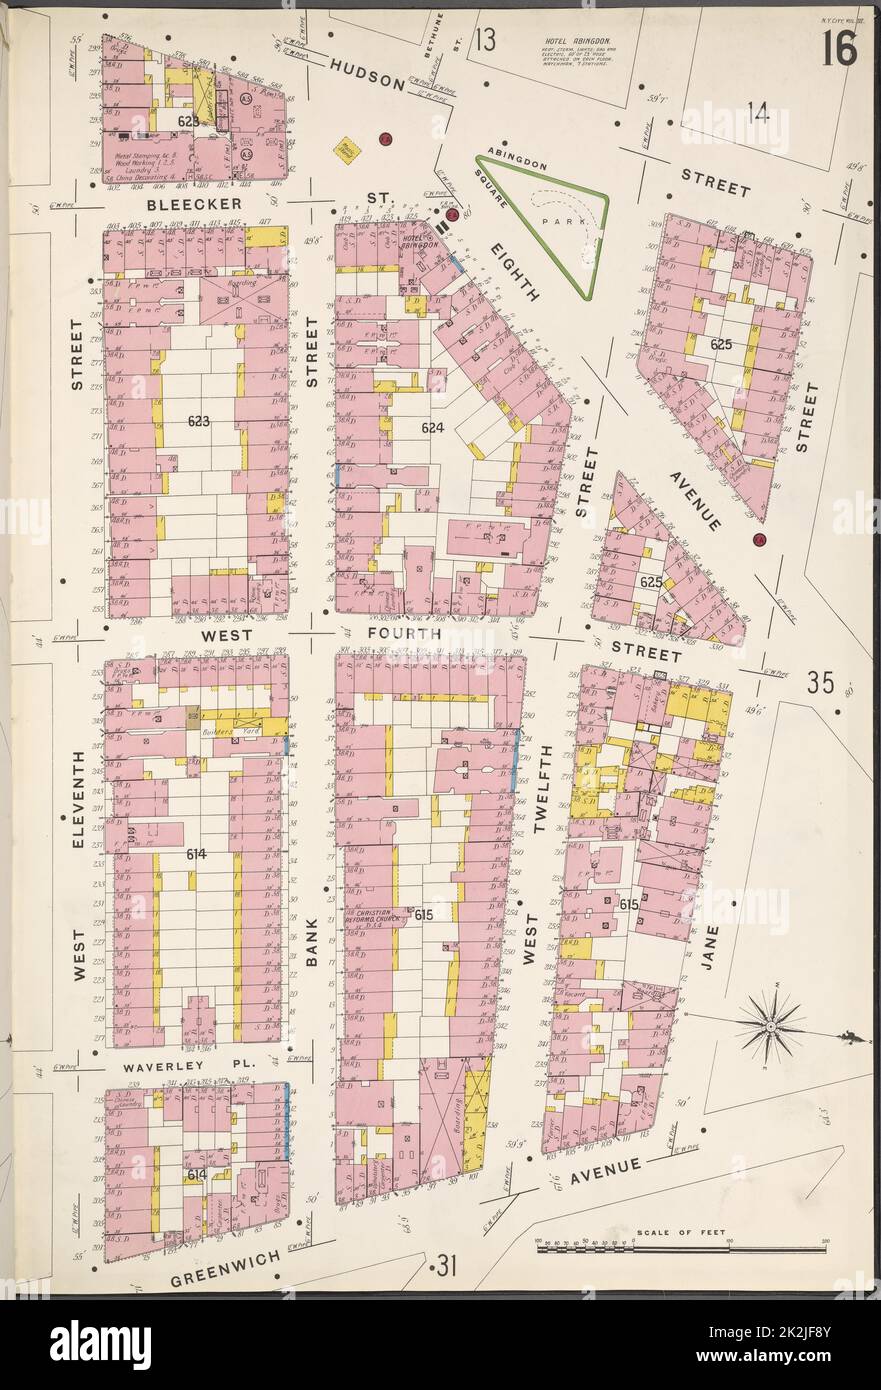 Cartographic, Maps. 1884 - 1936. Lionel Pincus and Princess Firyal Map Division. Fire insurance , New York (State), Real property , New York (State), Cities & towns , New York (State) Manhattan, V. 3, Plate No. 16 Map bounded by Hudson St., Jane St., Greenwich Ave., W. 11th St. Stock Photo